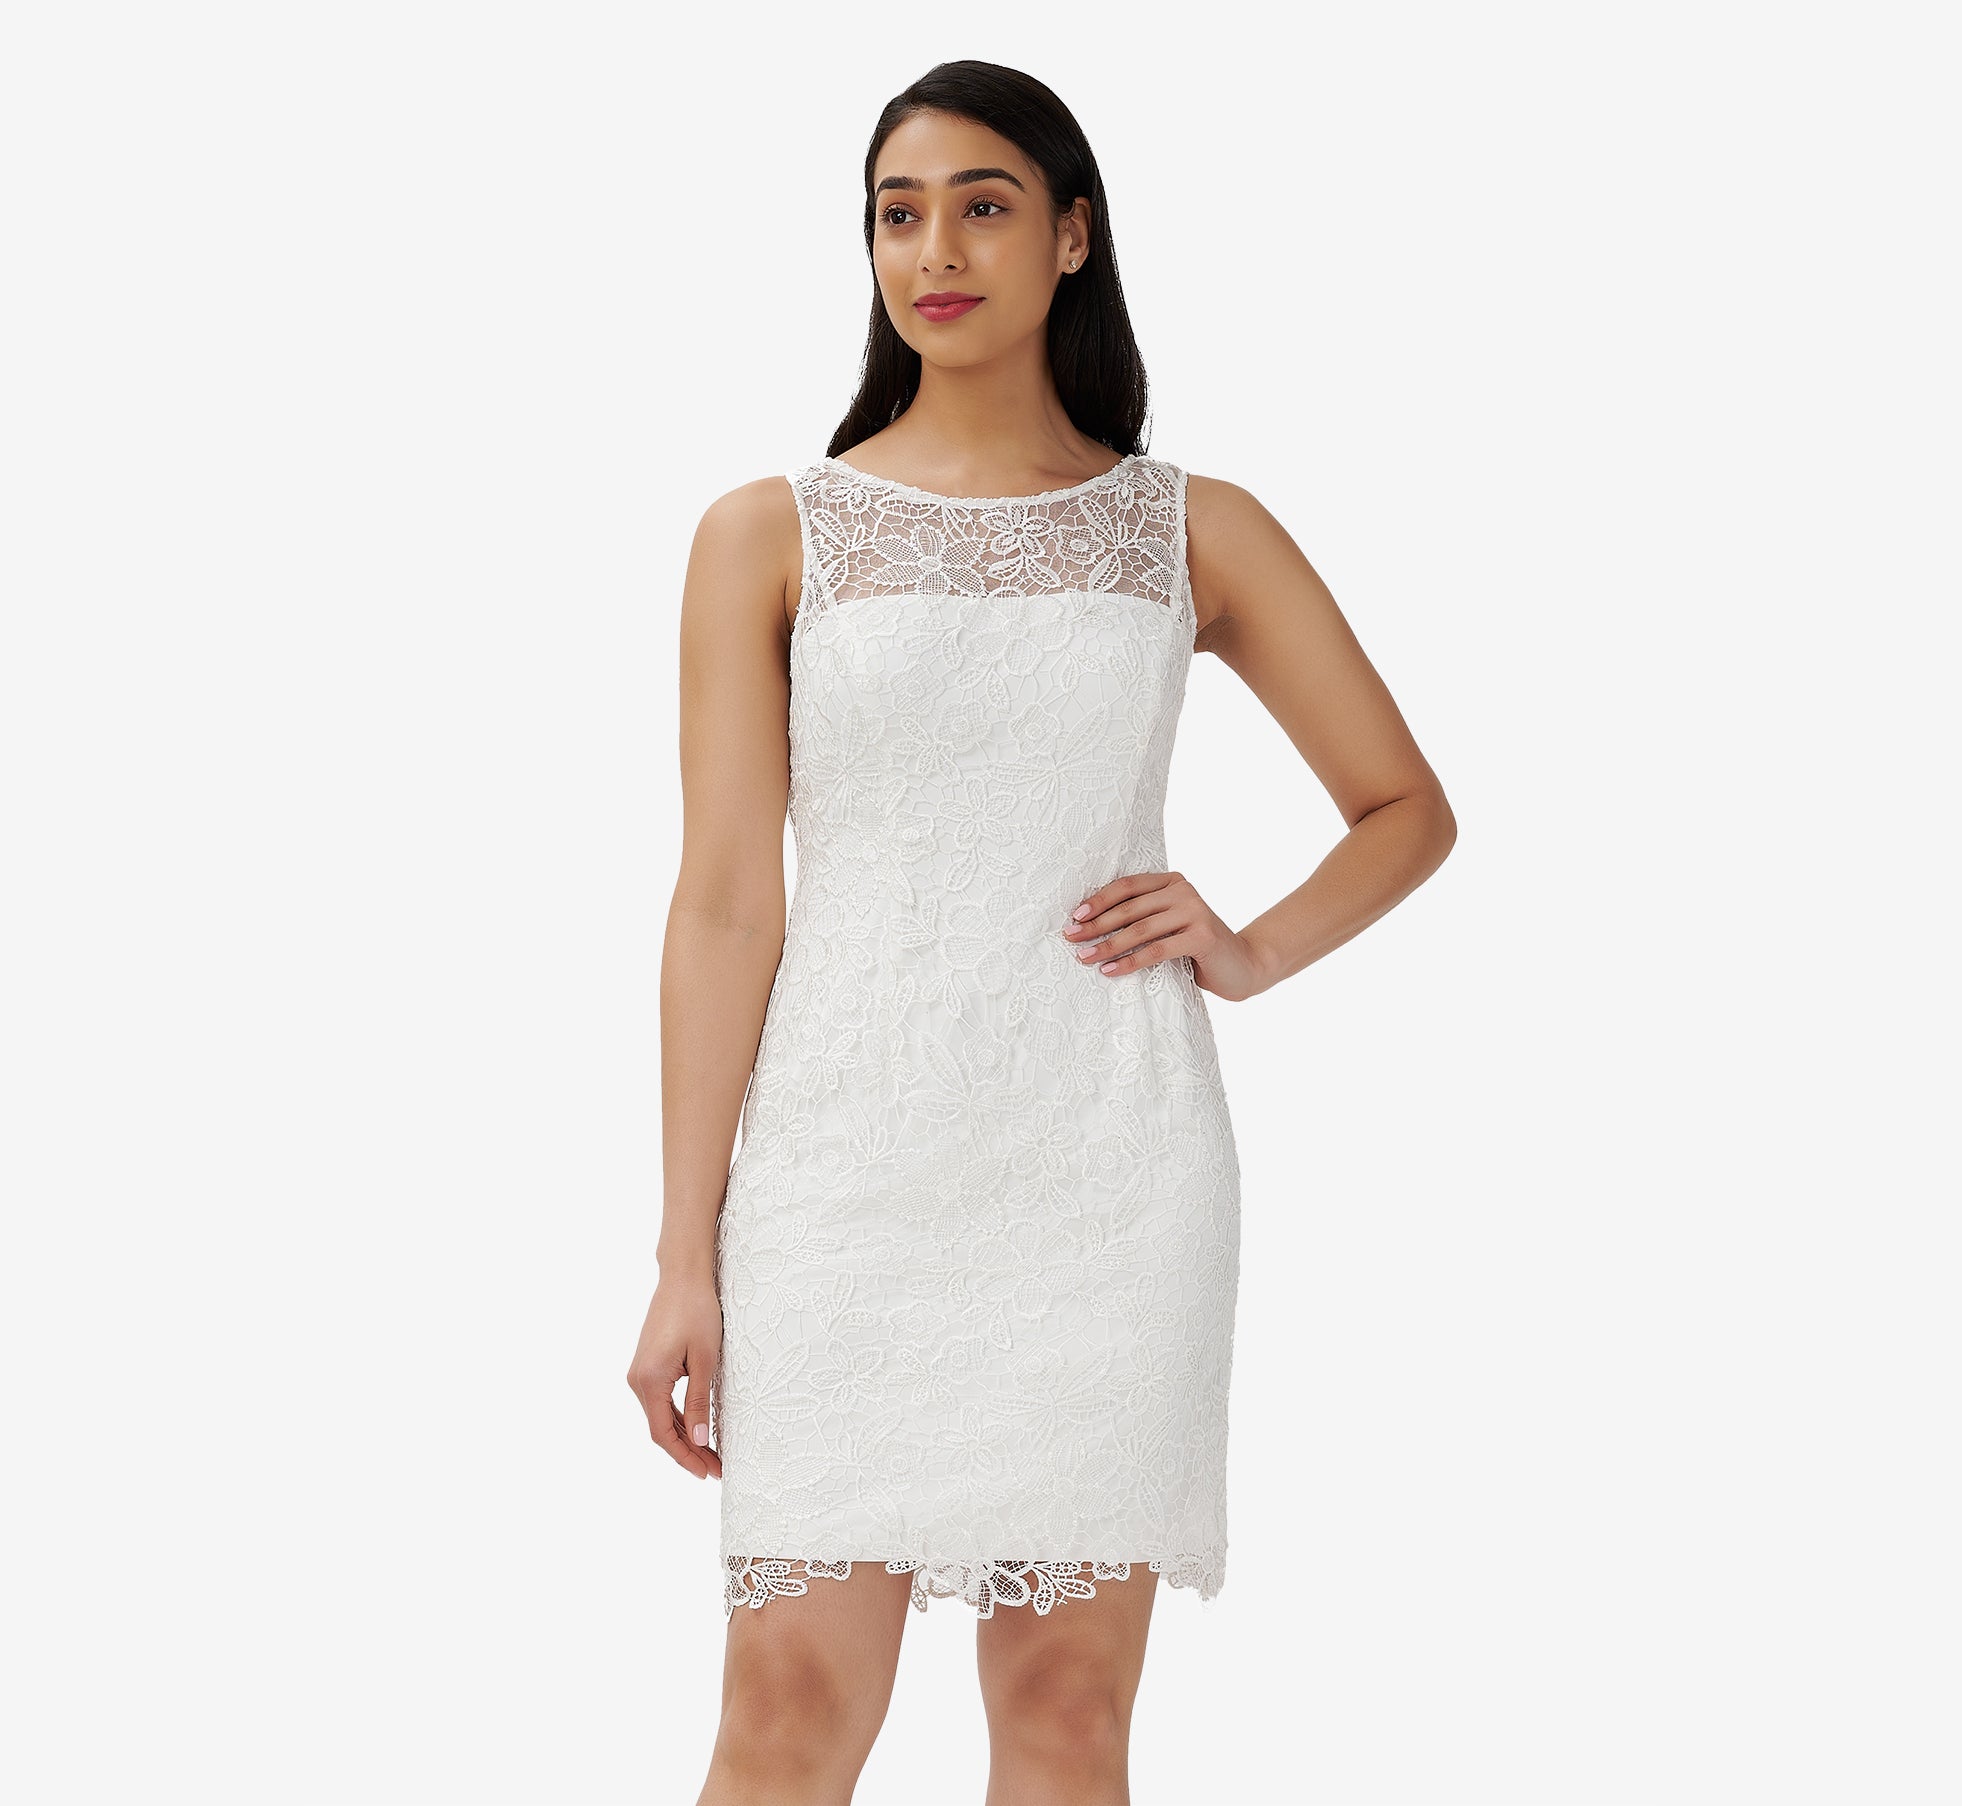 Adrianna Papell Short Guipure Lace Wedding Dress